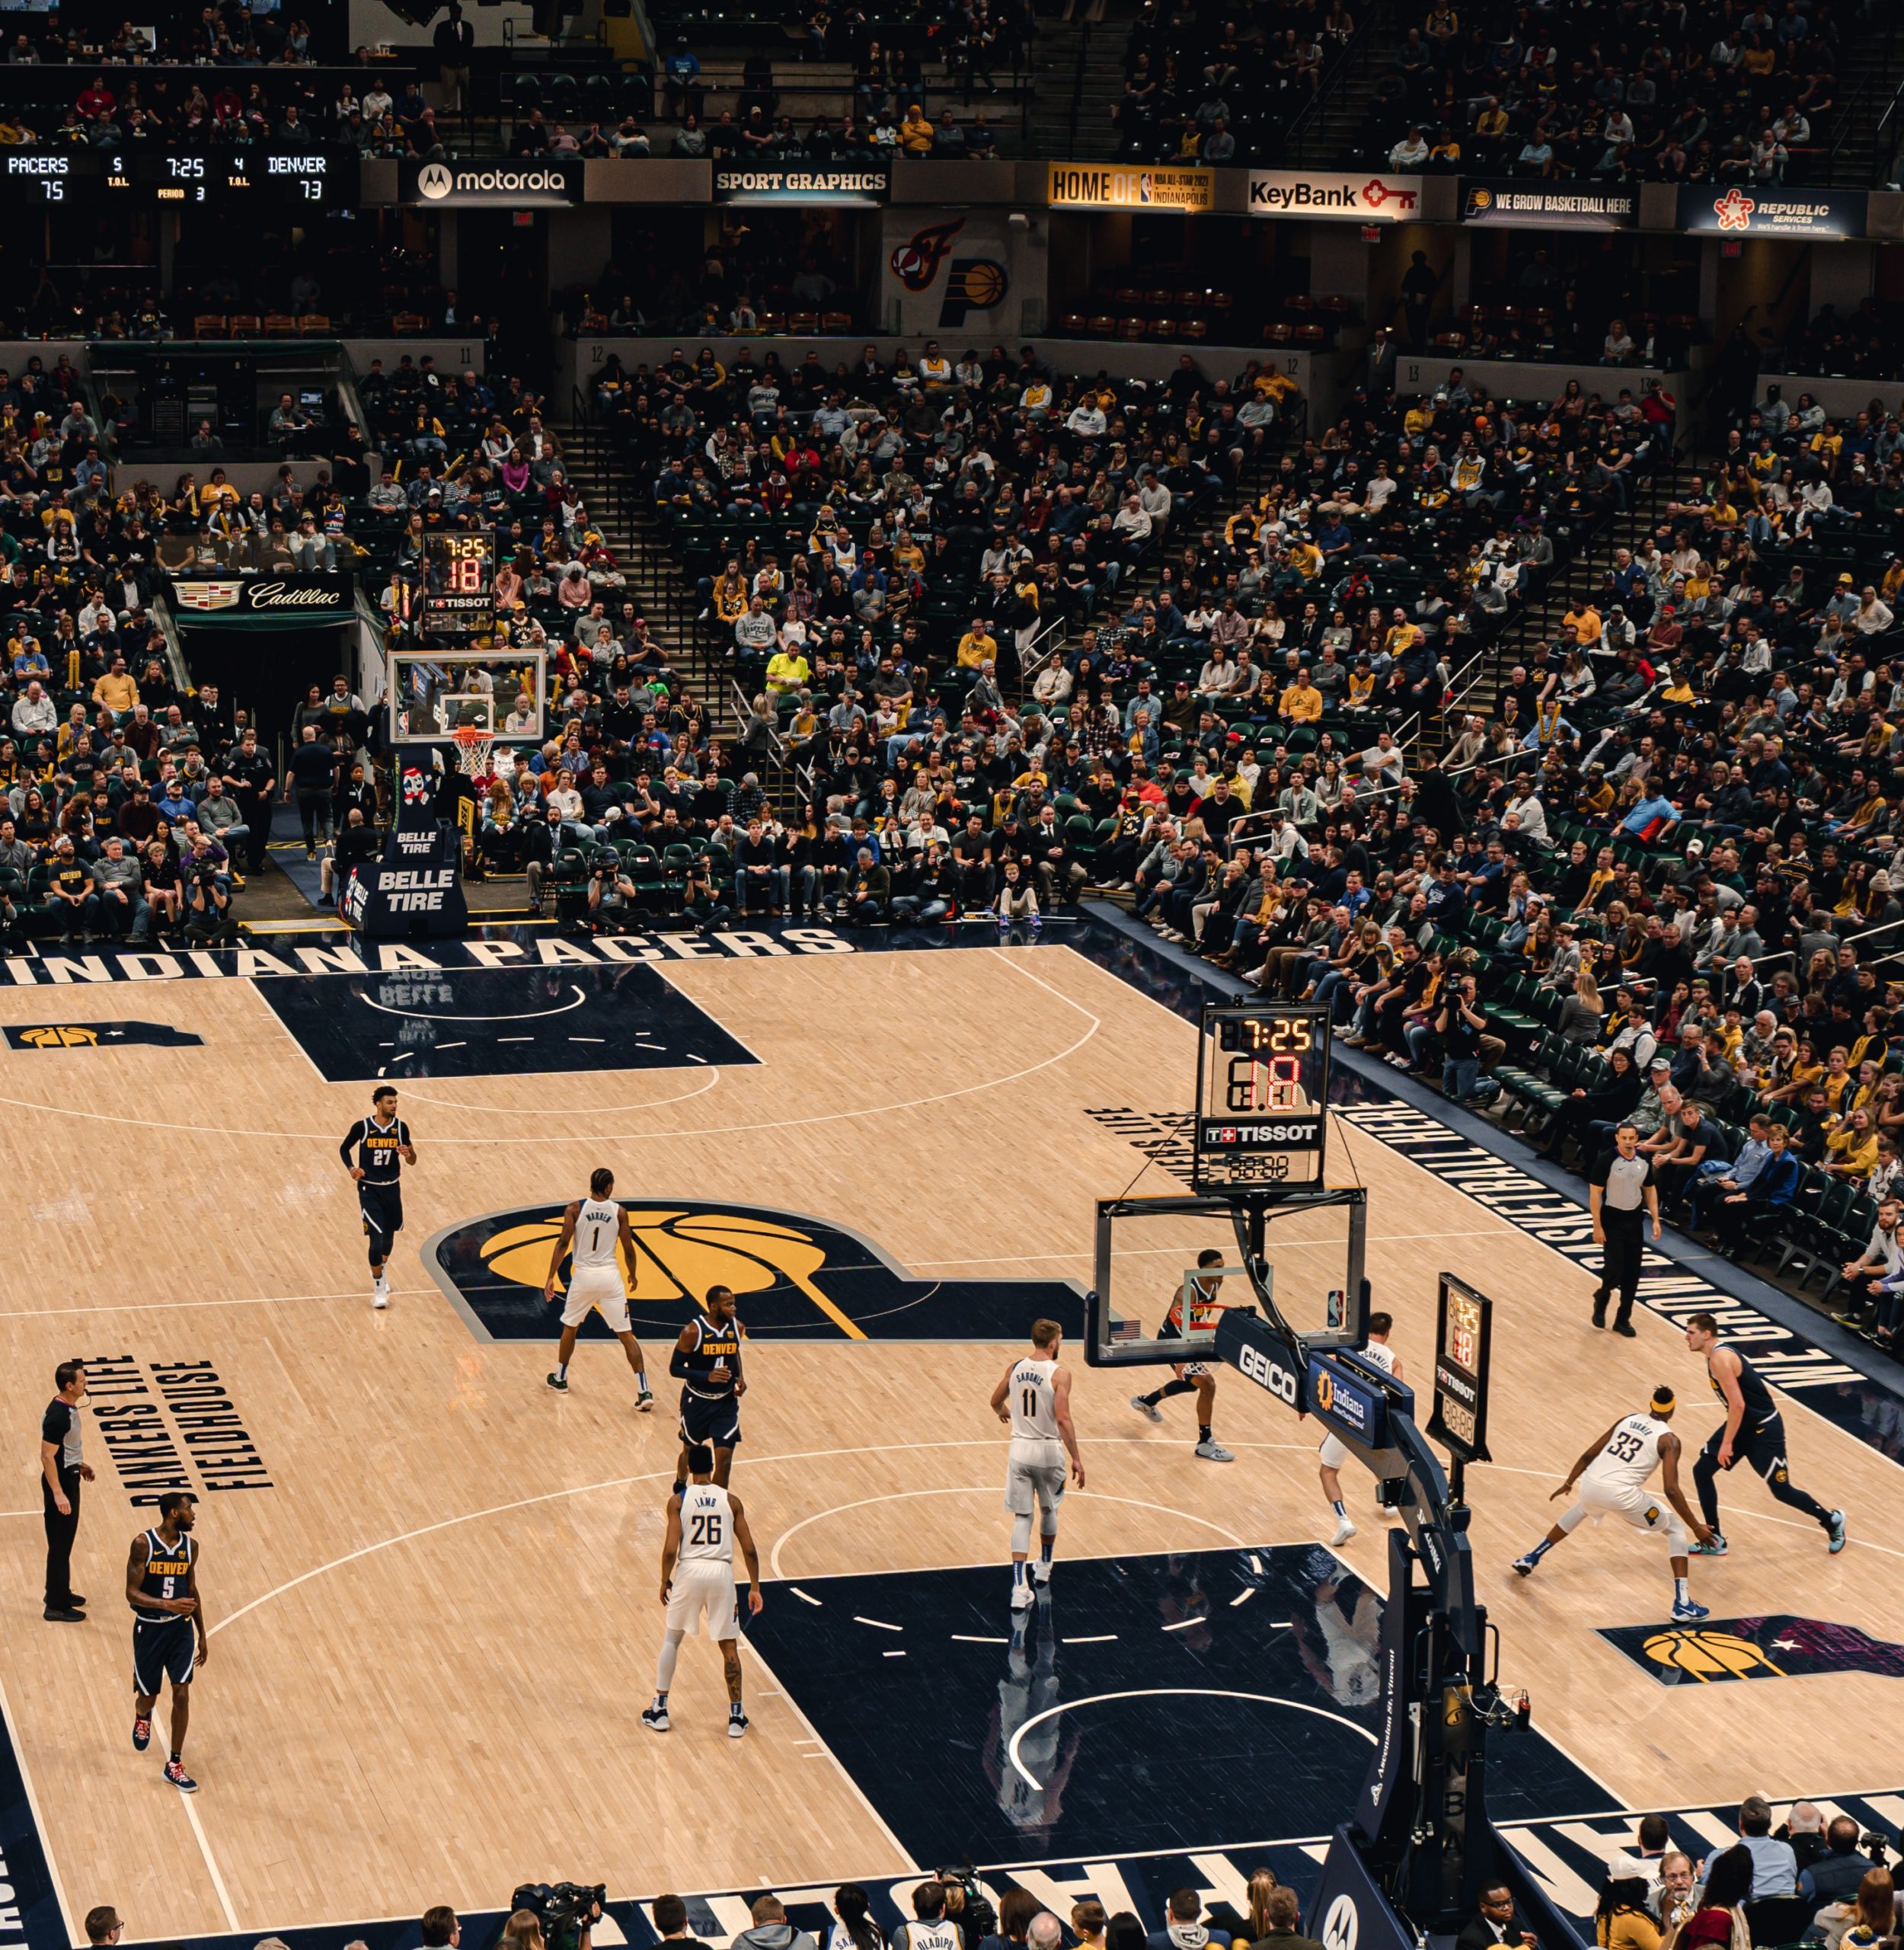 Bankers Life Fieldhouse. One of the top basektball spots in Indiana.